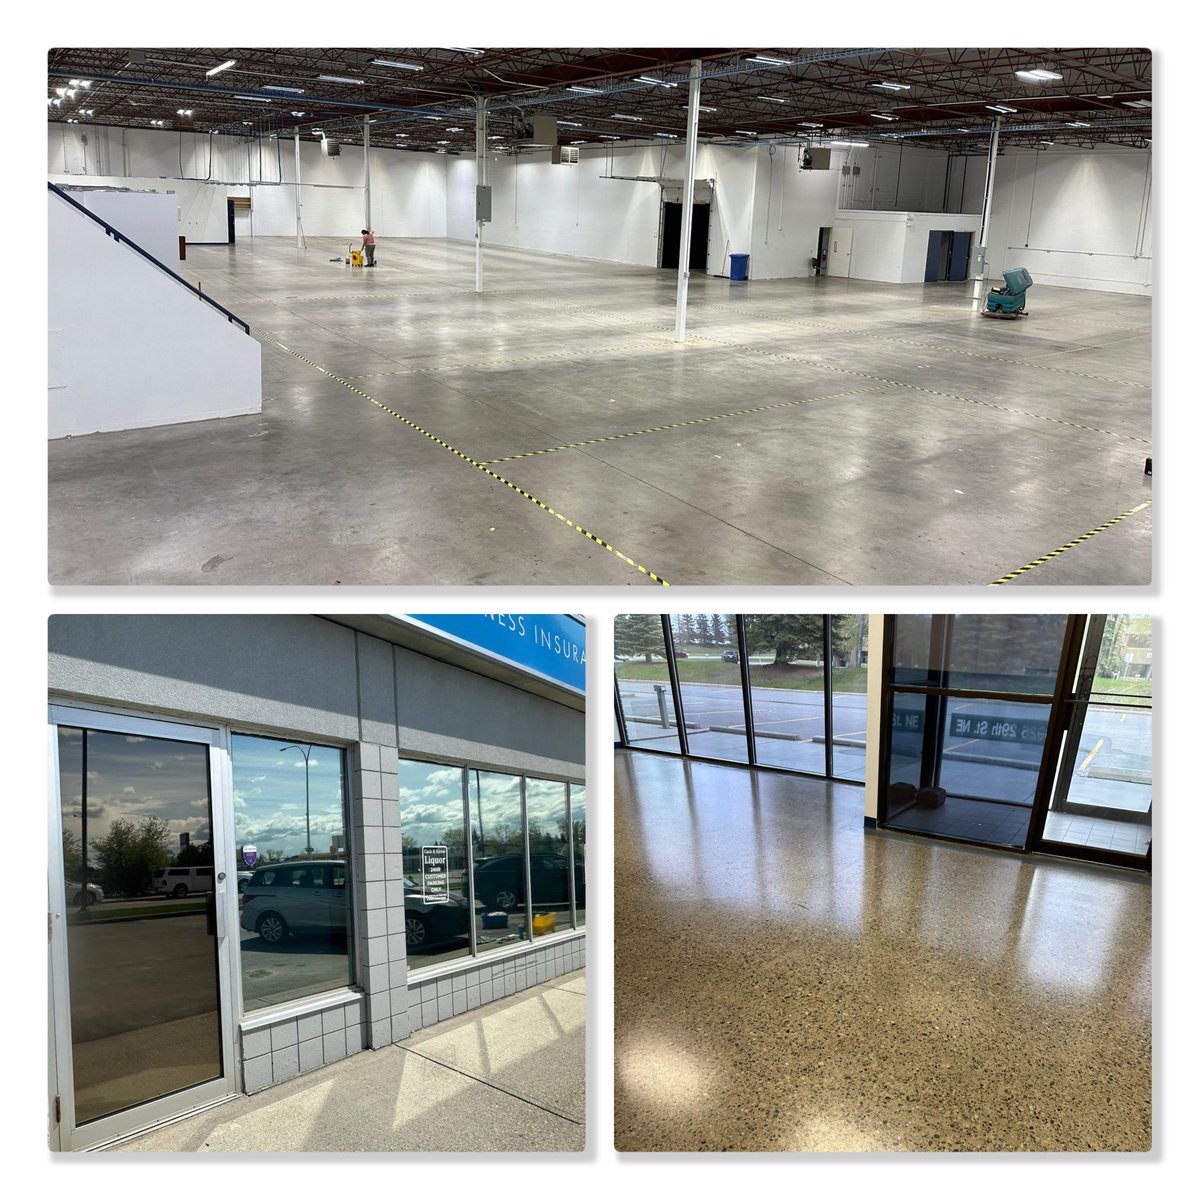 Industrial building cleaning. Floors to ceilings, inside and out. Contact us for a quote on janitorial and periodic cleaning services. efsclean.com #calgary #industrial #cleaningservices #cleaningcompany